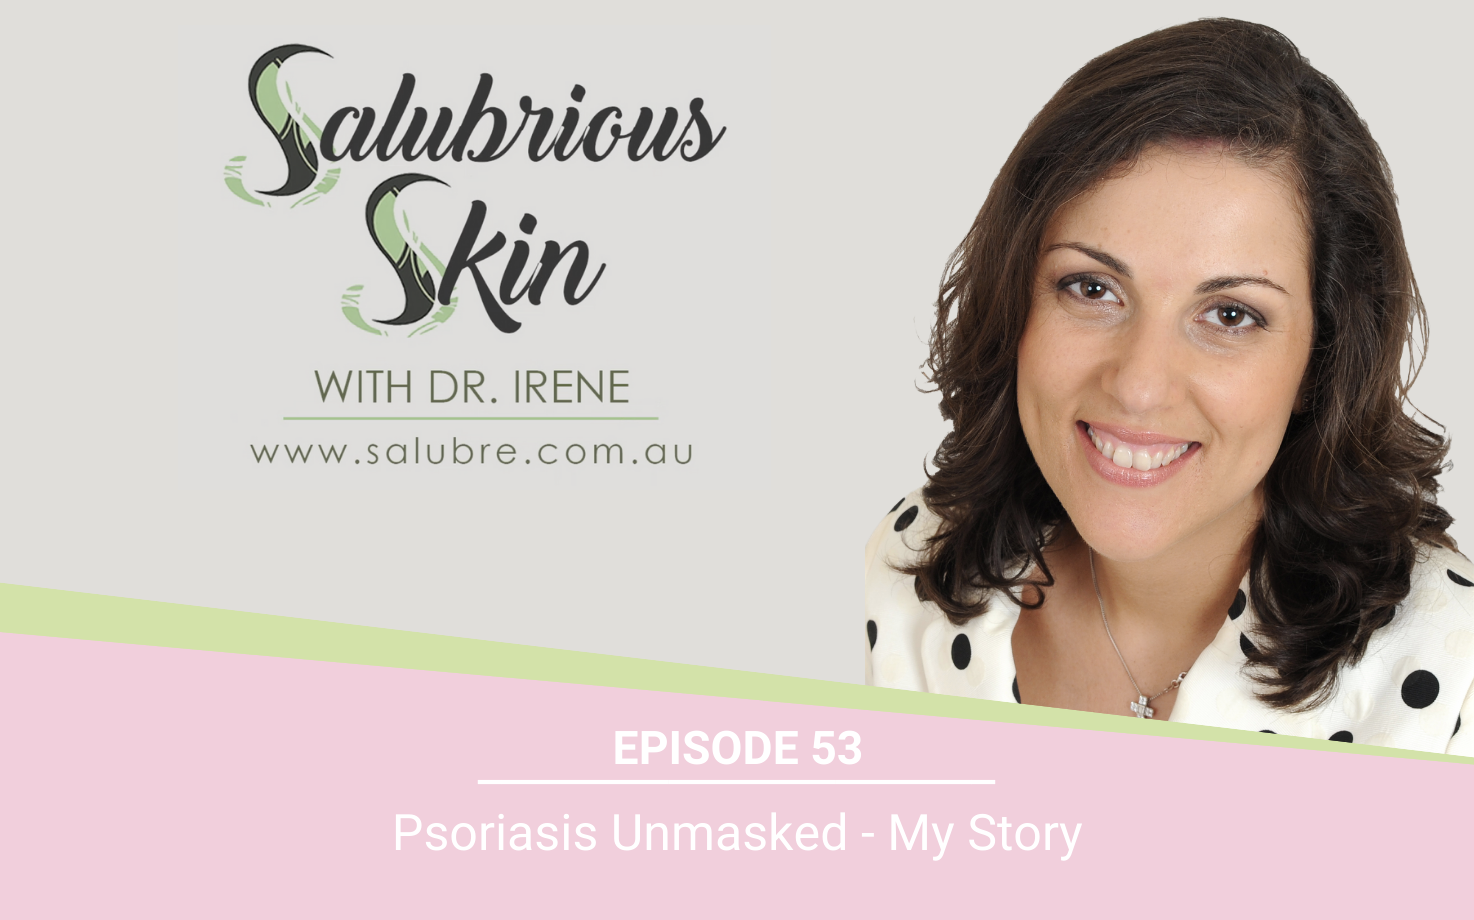 Podcast 53: Psoriasis Unmasked - My Story